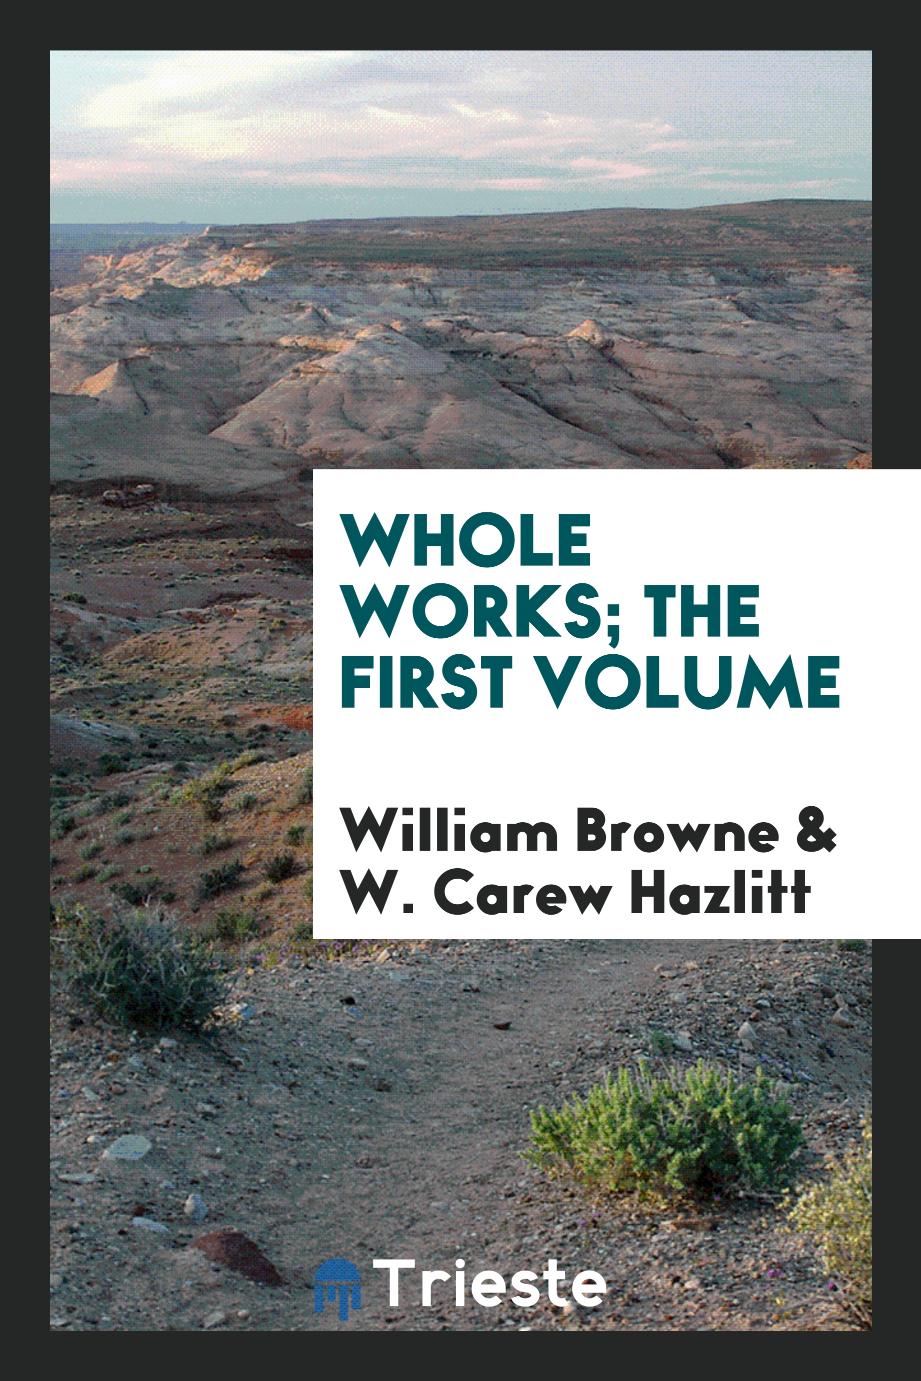 Whole works; The first volume